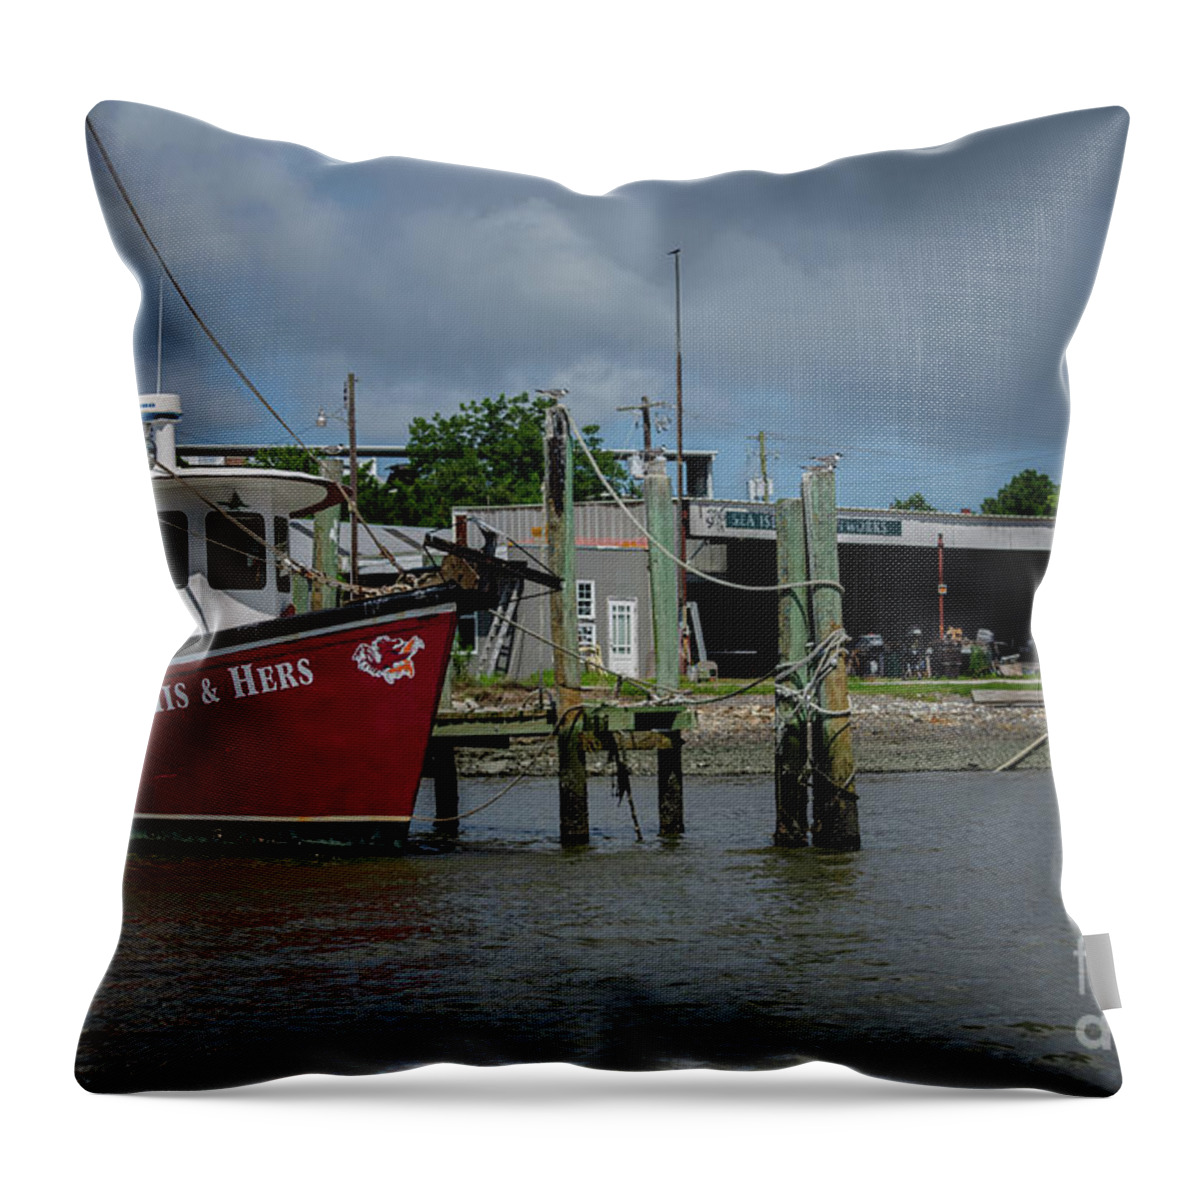 Gamecocks Throw Pillow featuring the photograph Gamecocks - His and Hers by Dale Powell